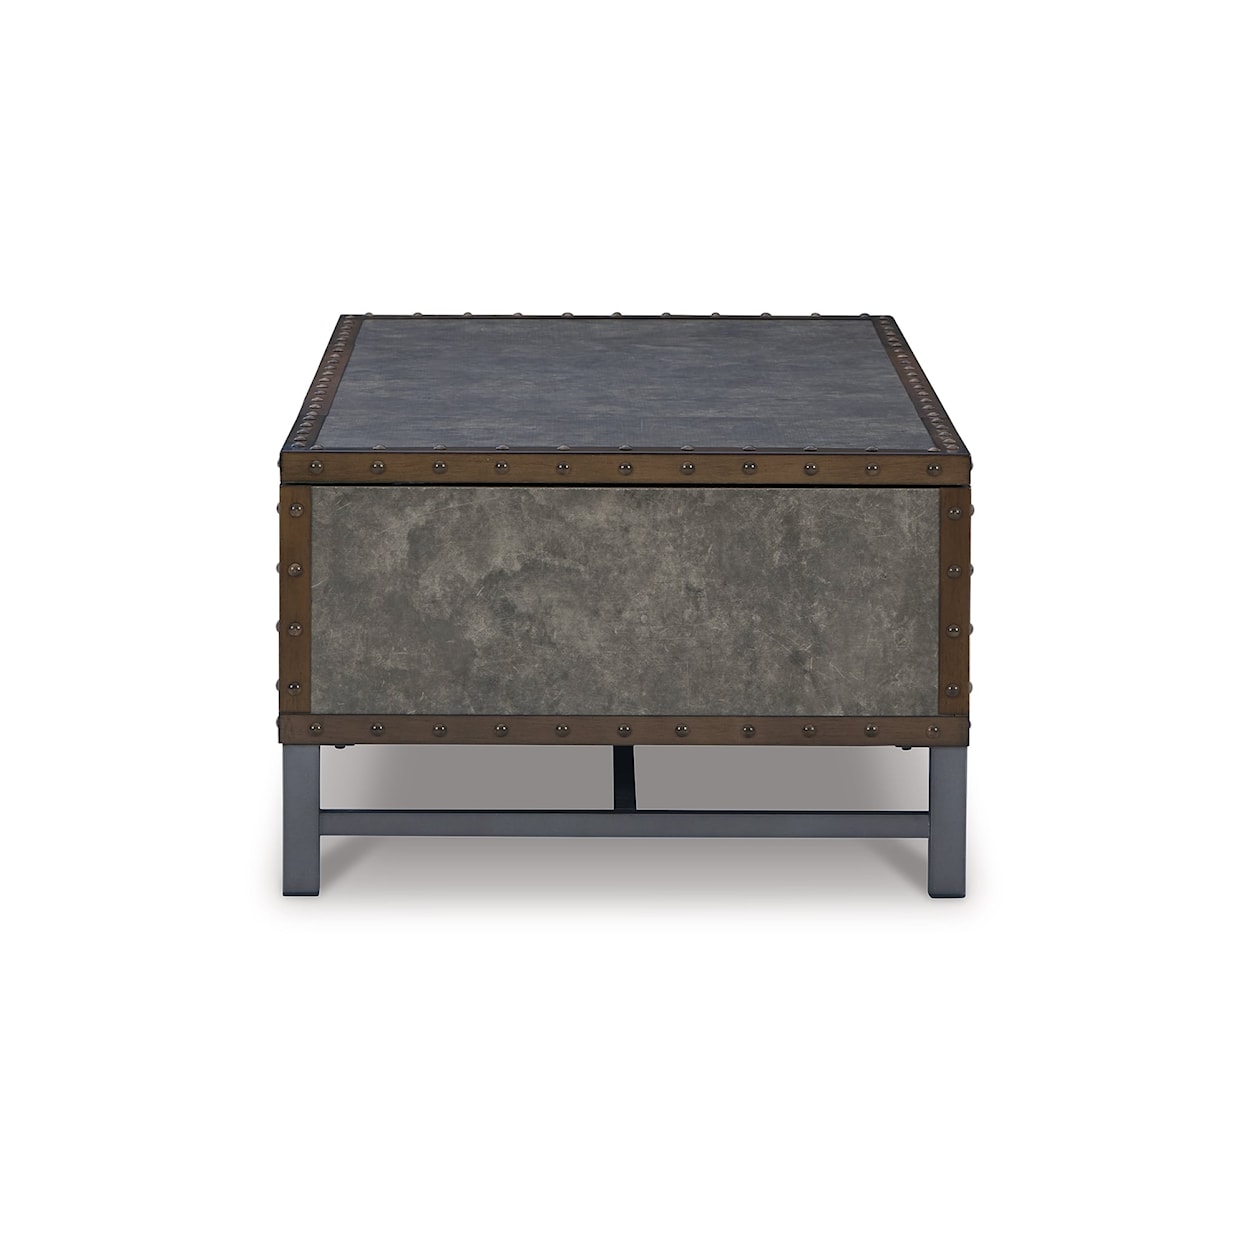 Signature Derrylin Lift-Top Coffee Table